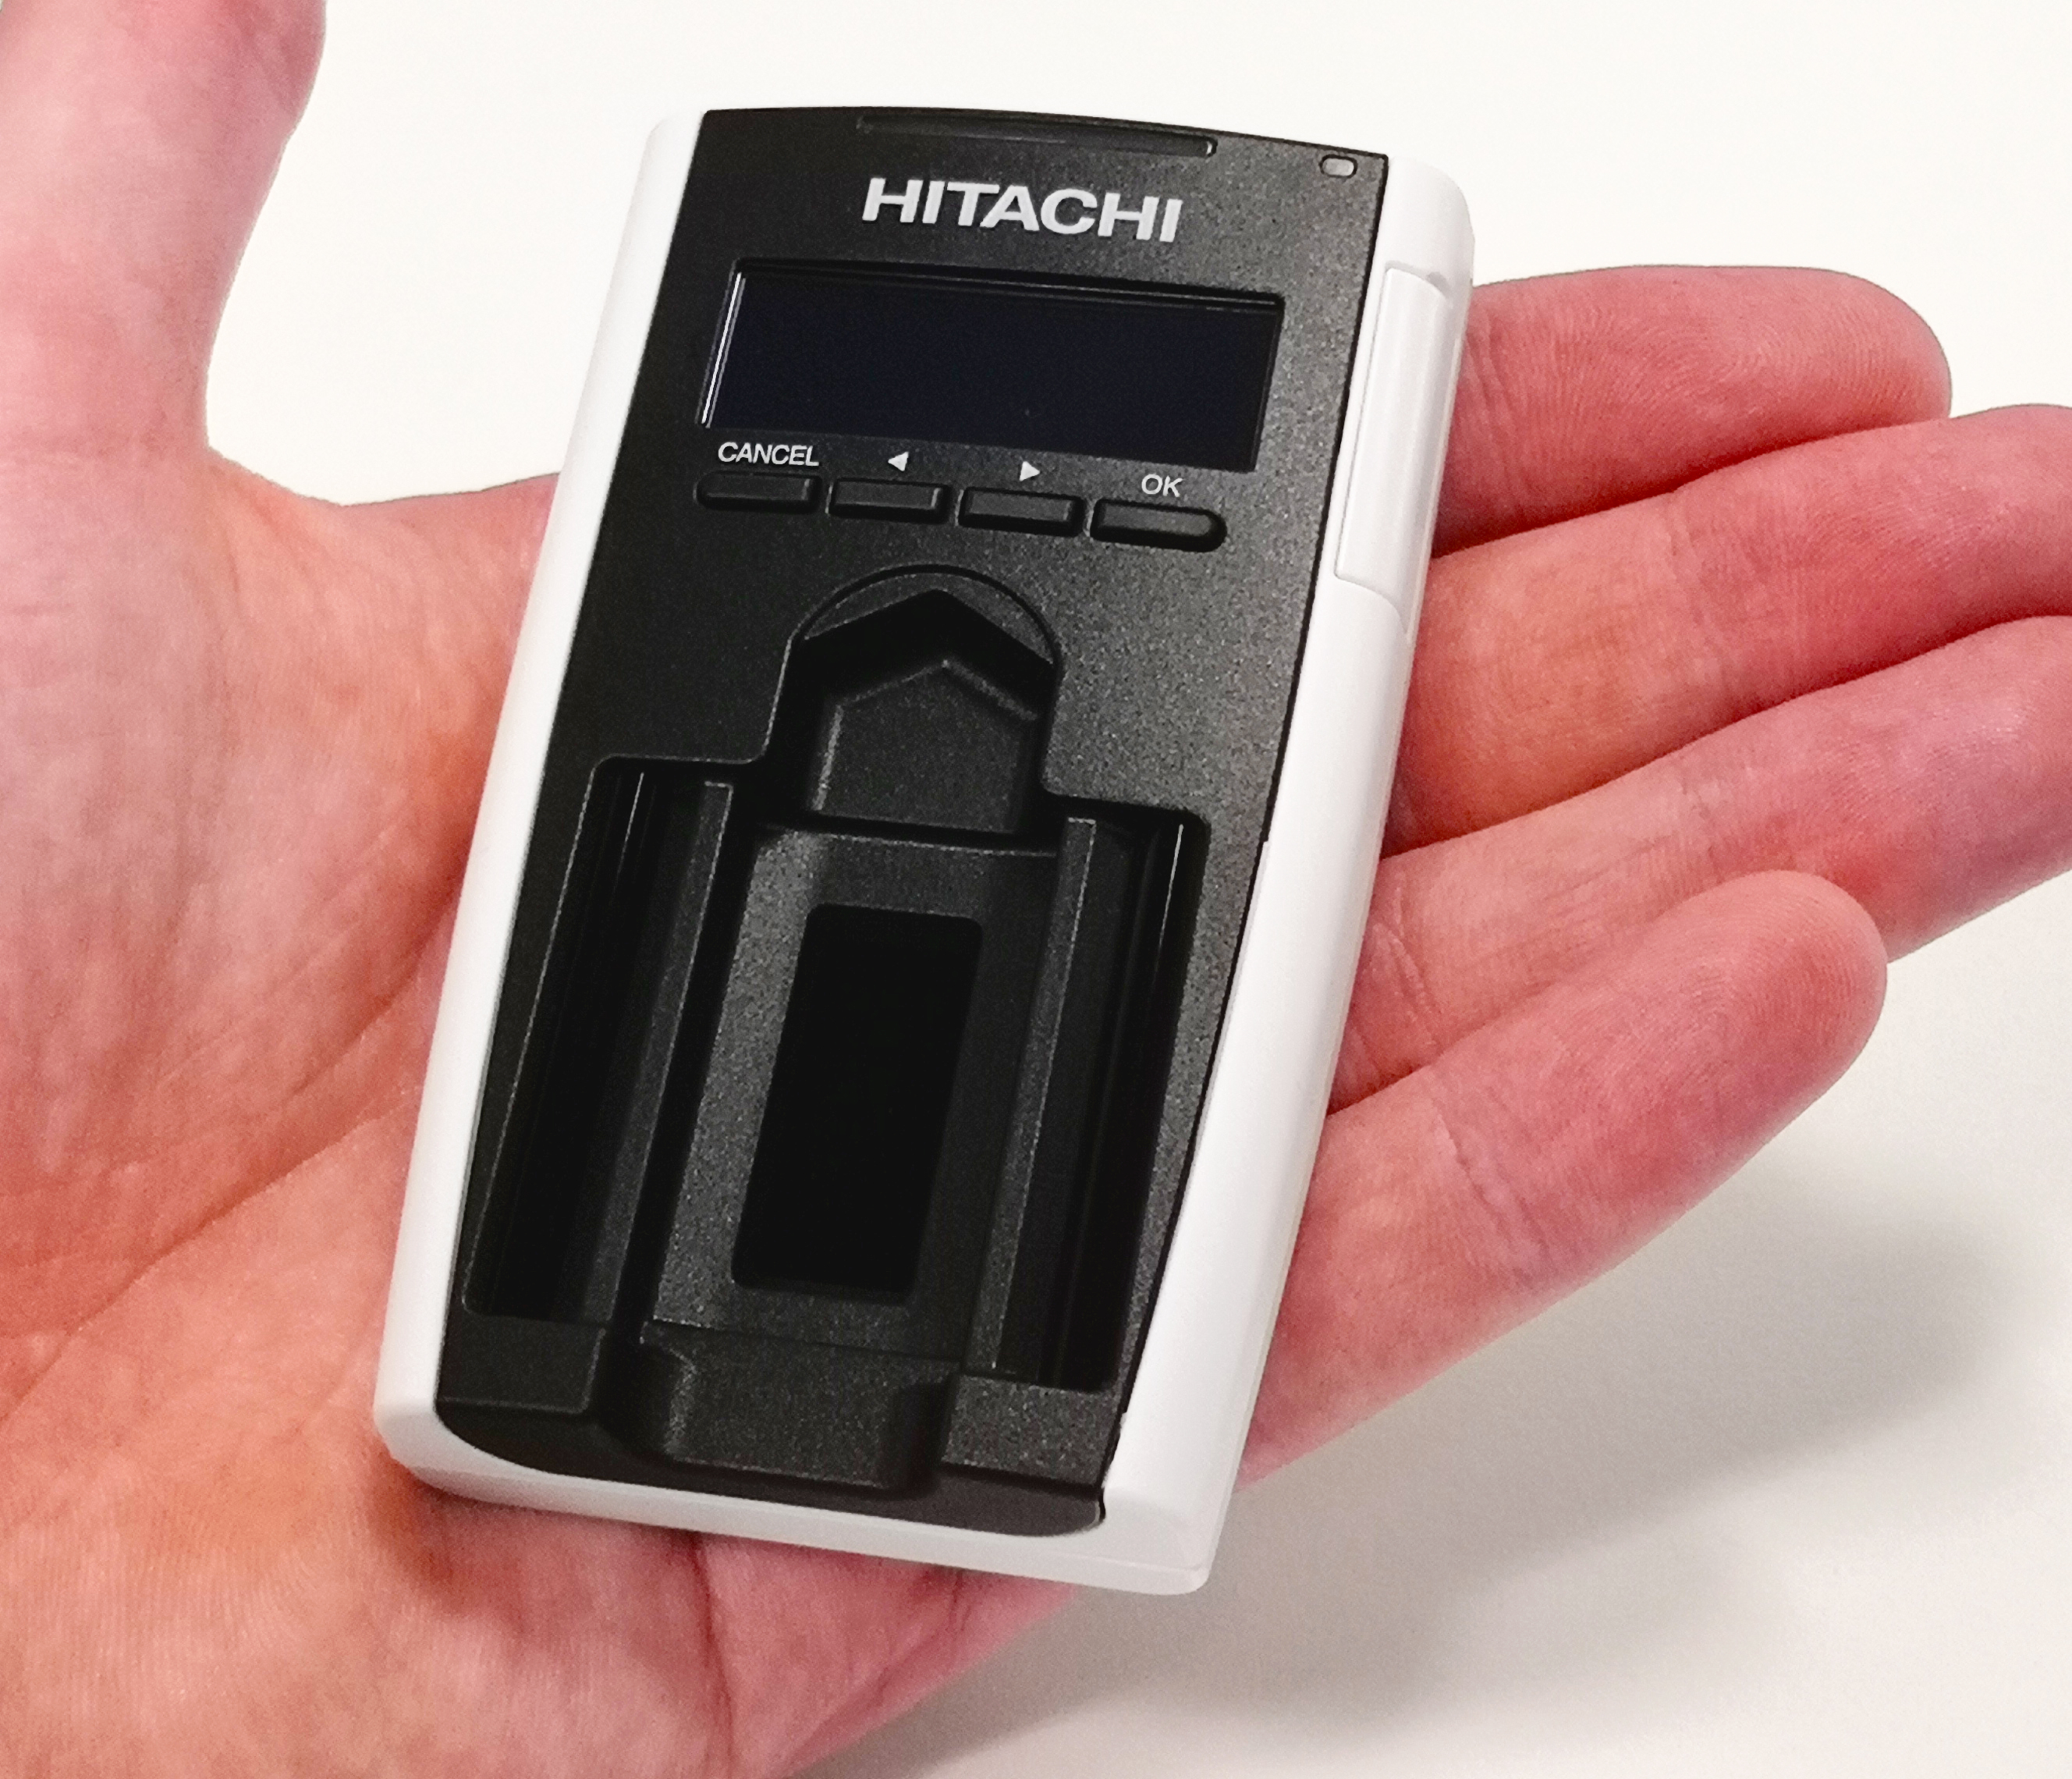 Barclays and Hitachi launch next-generation finger vein scanner